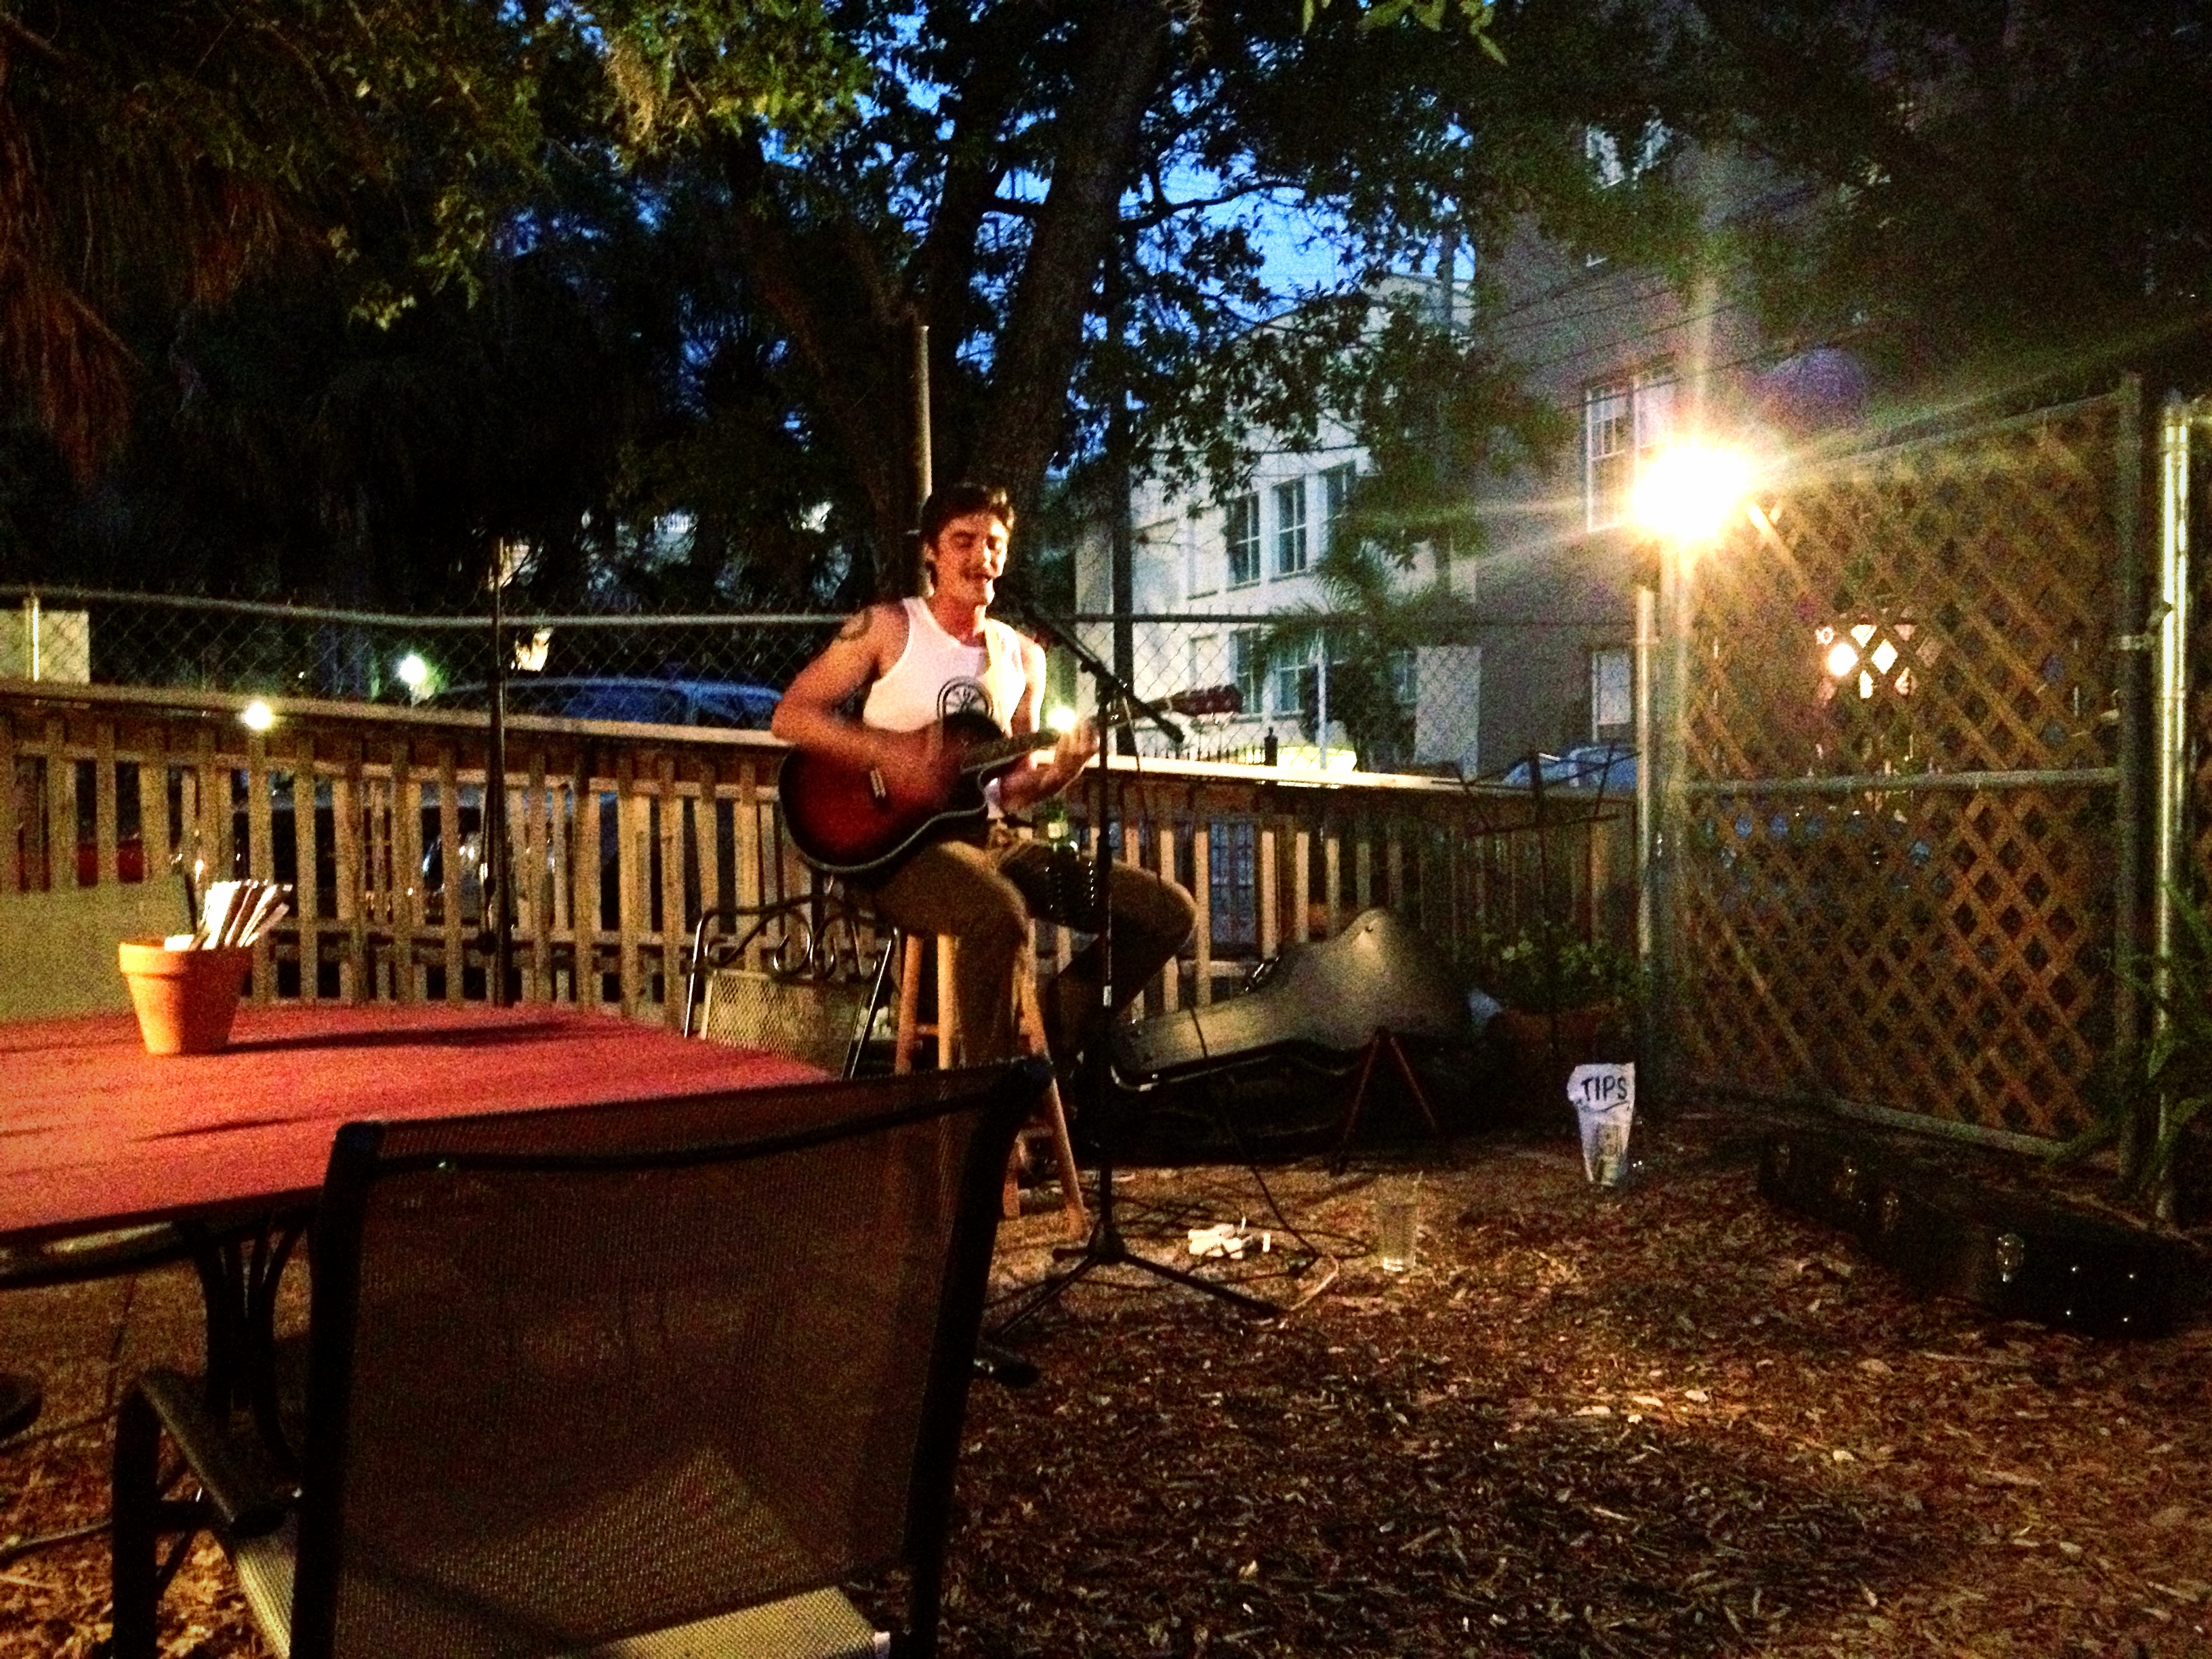 Justin Kaiser brought the sun down with a set of originals and golden oldies.